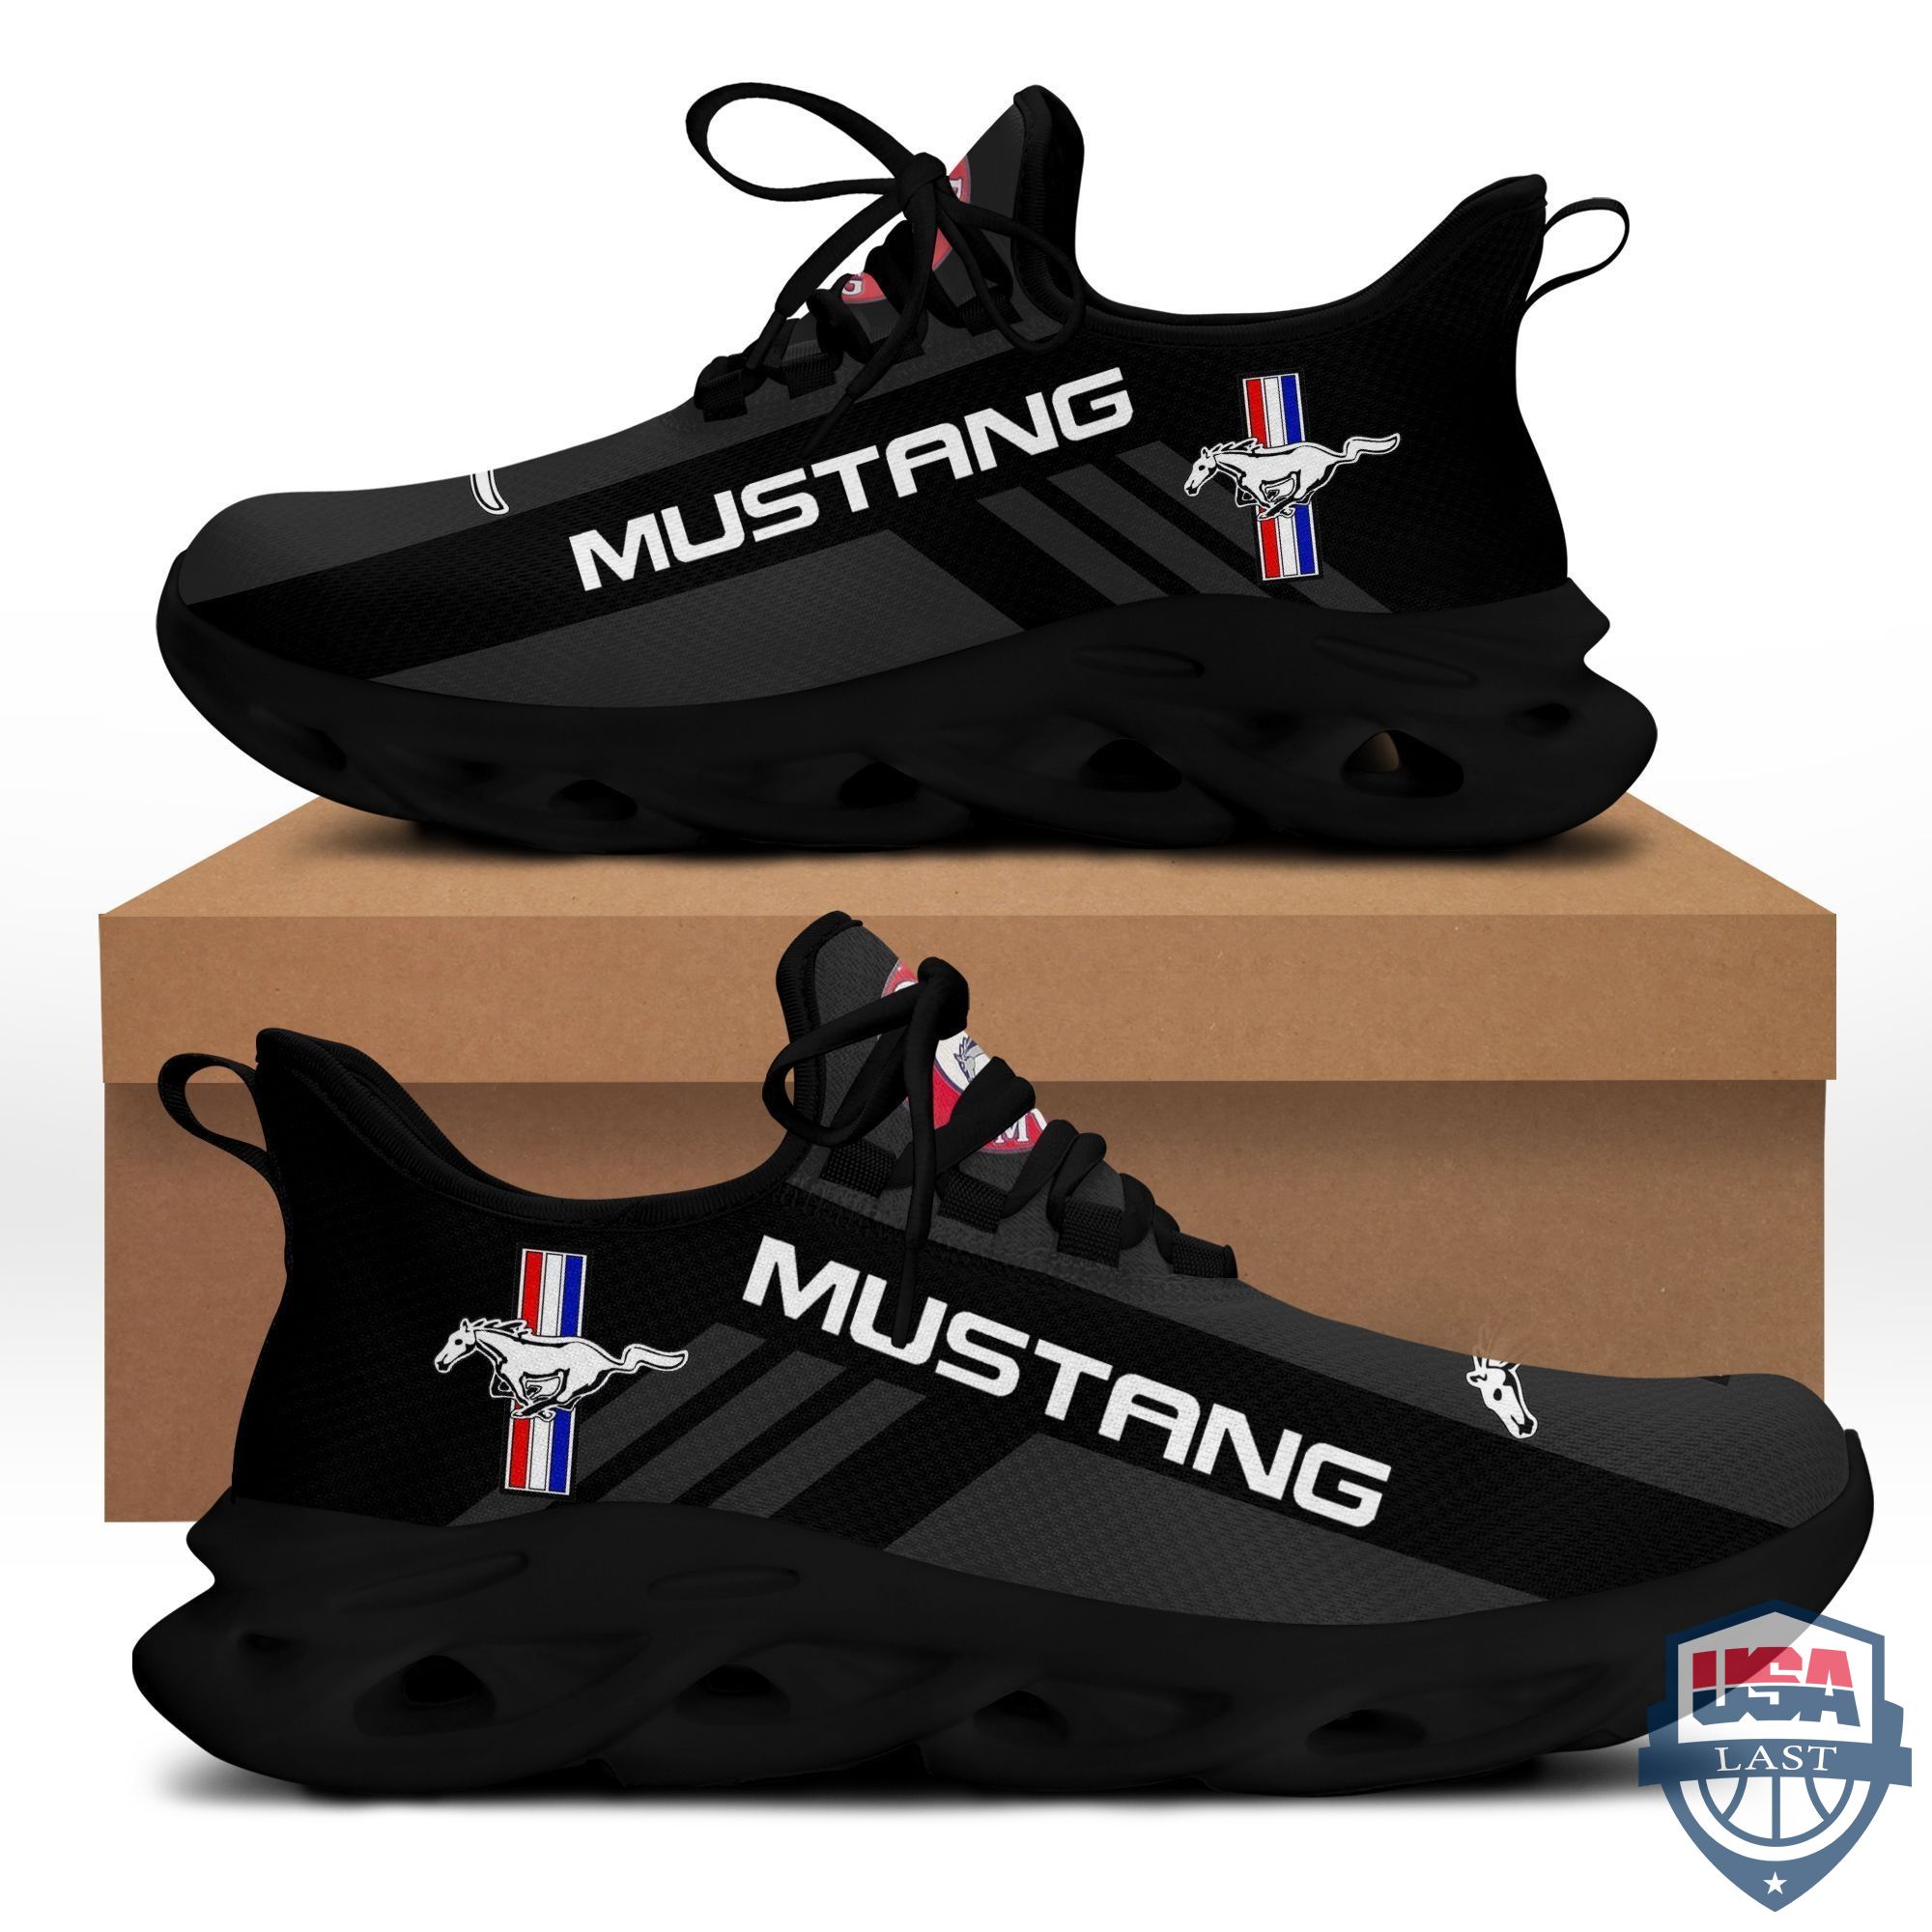 Top Trending – Ford mustang max soul shoes black version